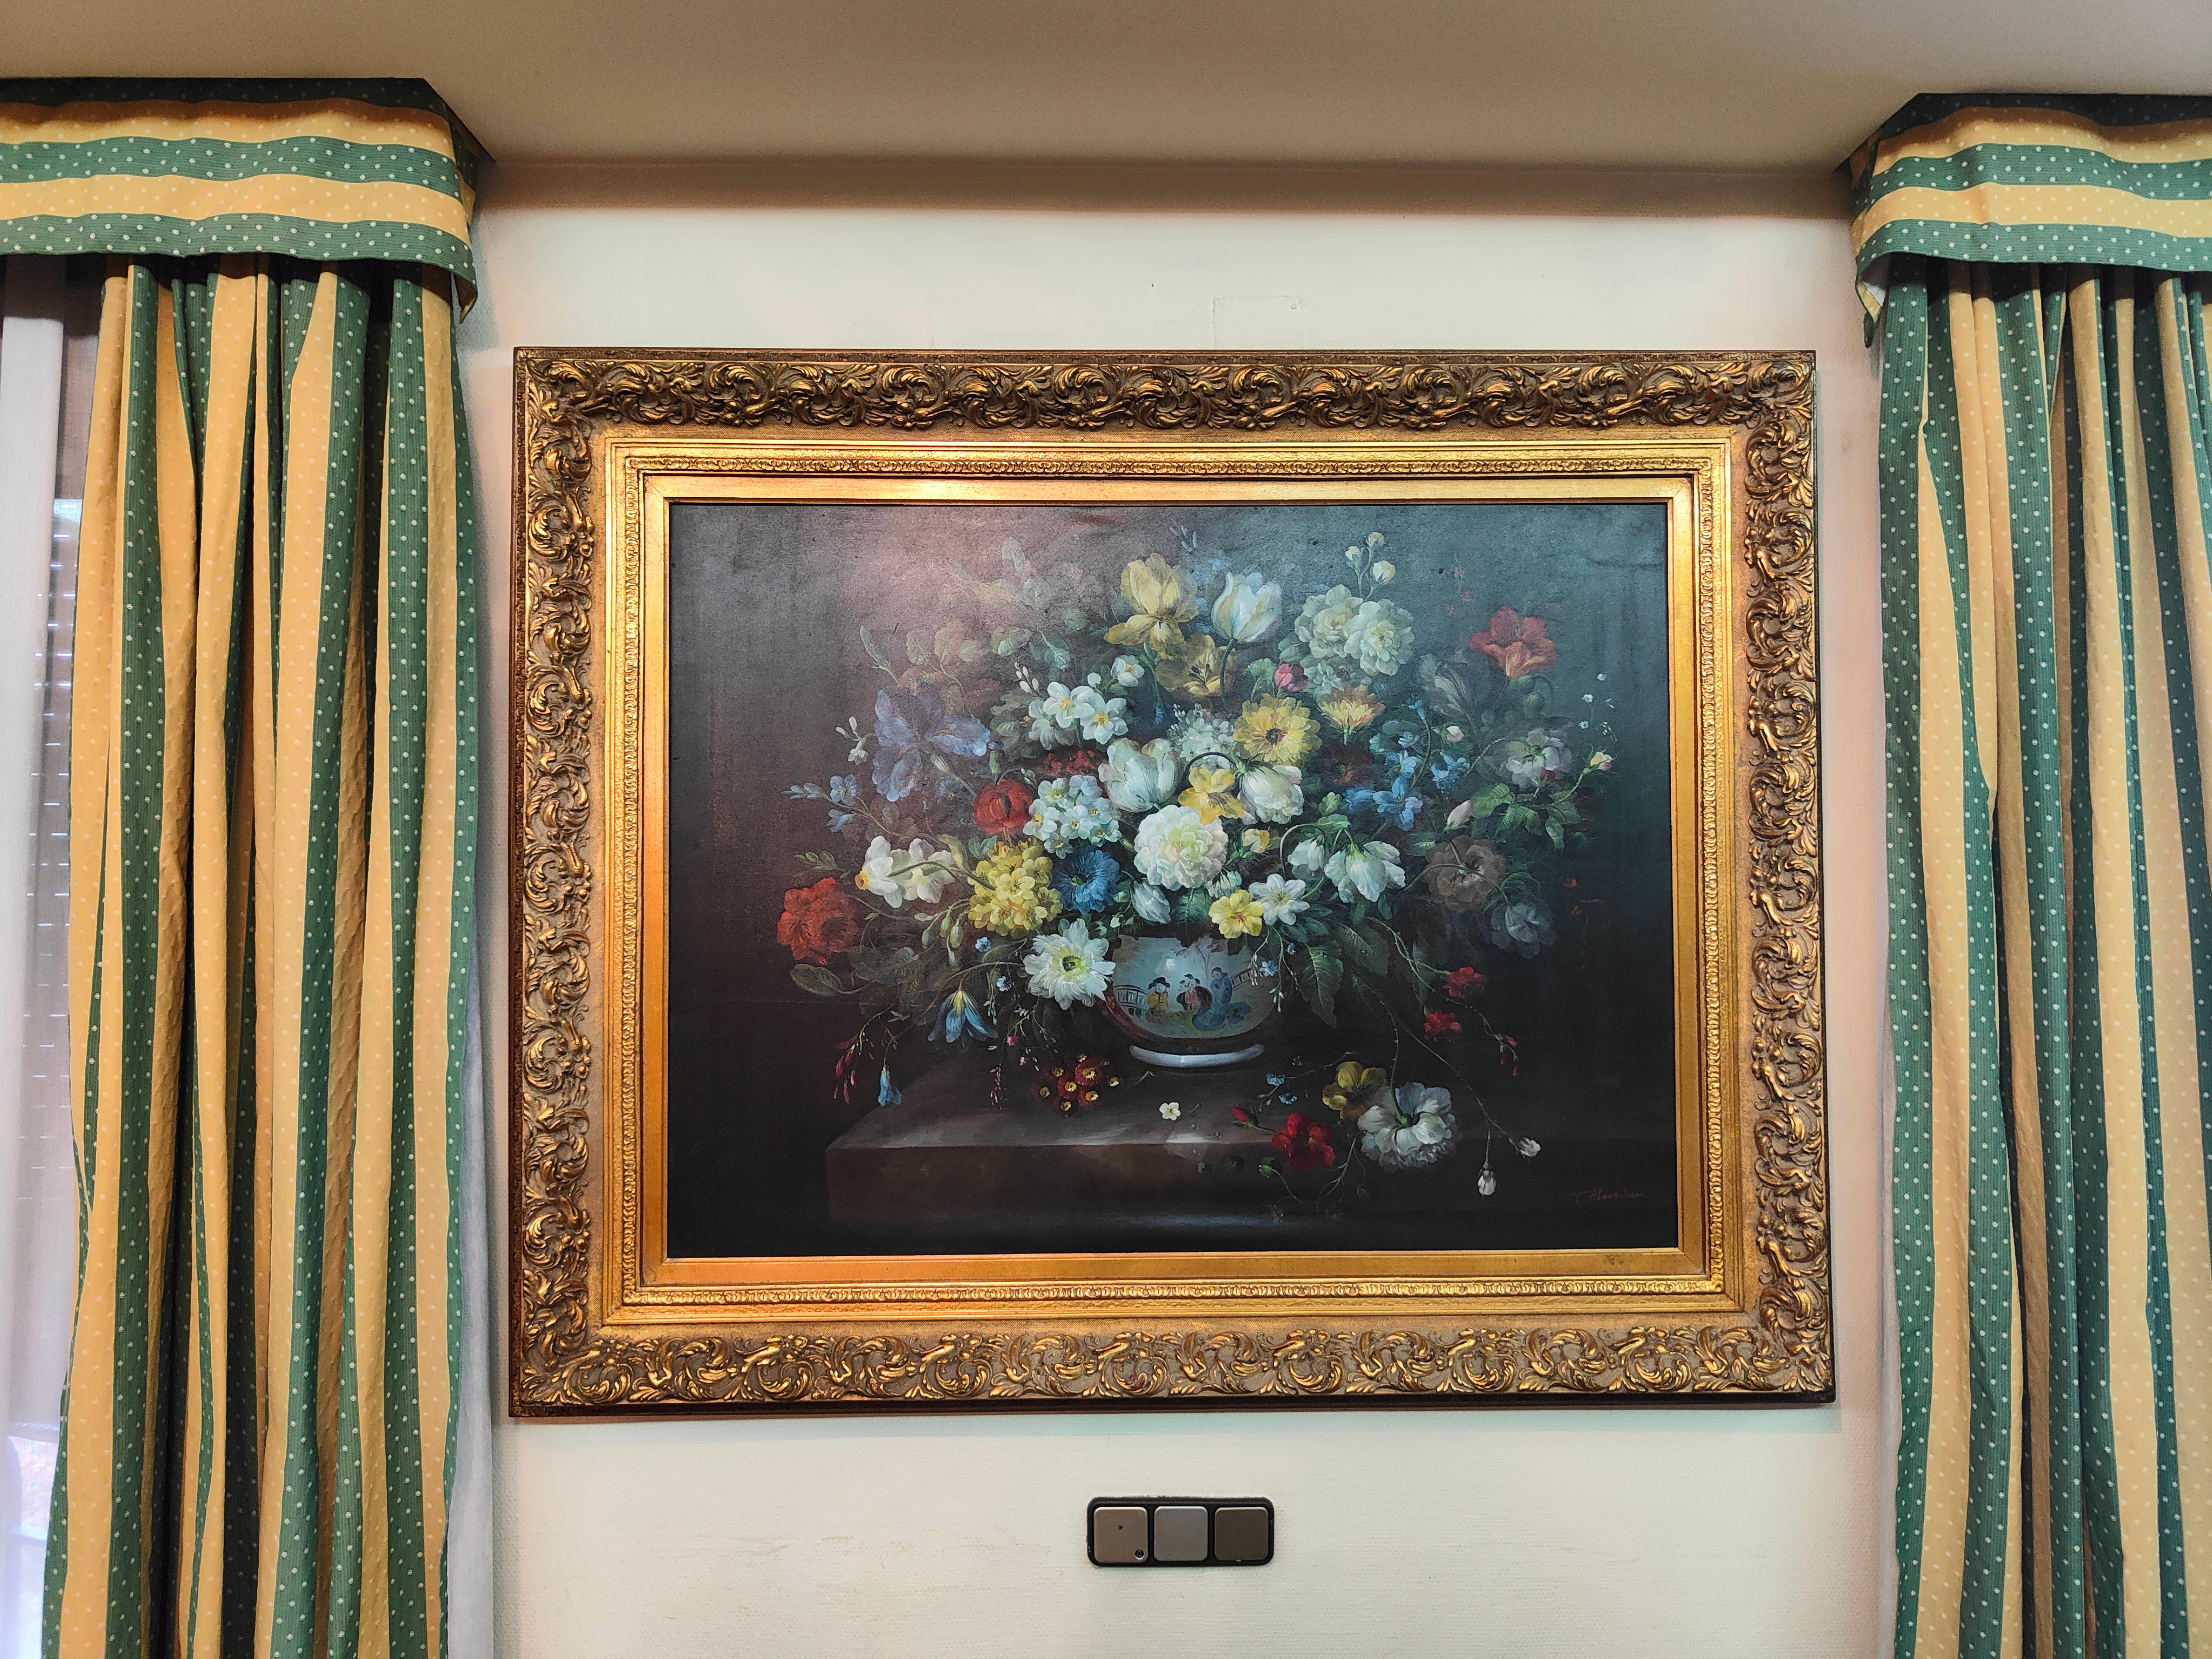 Large oil on canvas by Terence Alexander-British
Large oil on canvas by Terence Alexander-British elegant oil on canvas from the 50s signed by Terence Alexander the painting is in very good condition, measures: 157 x 127 cm and 124 x 95 cm.